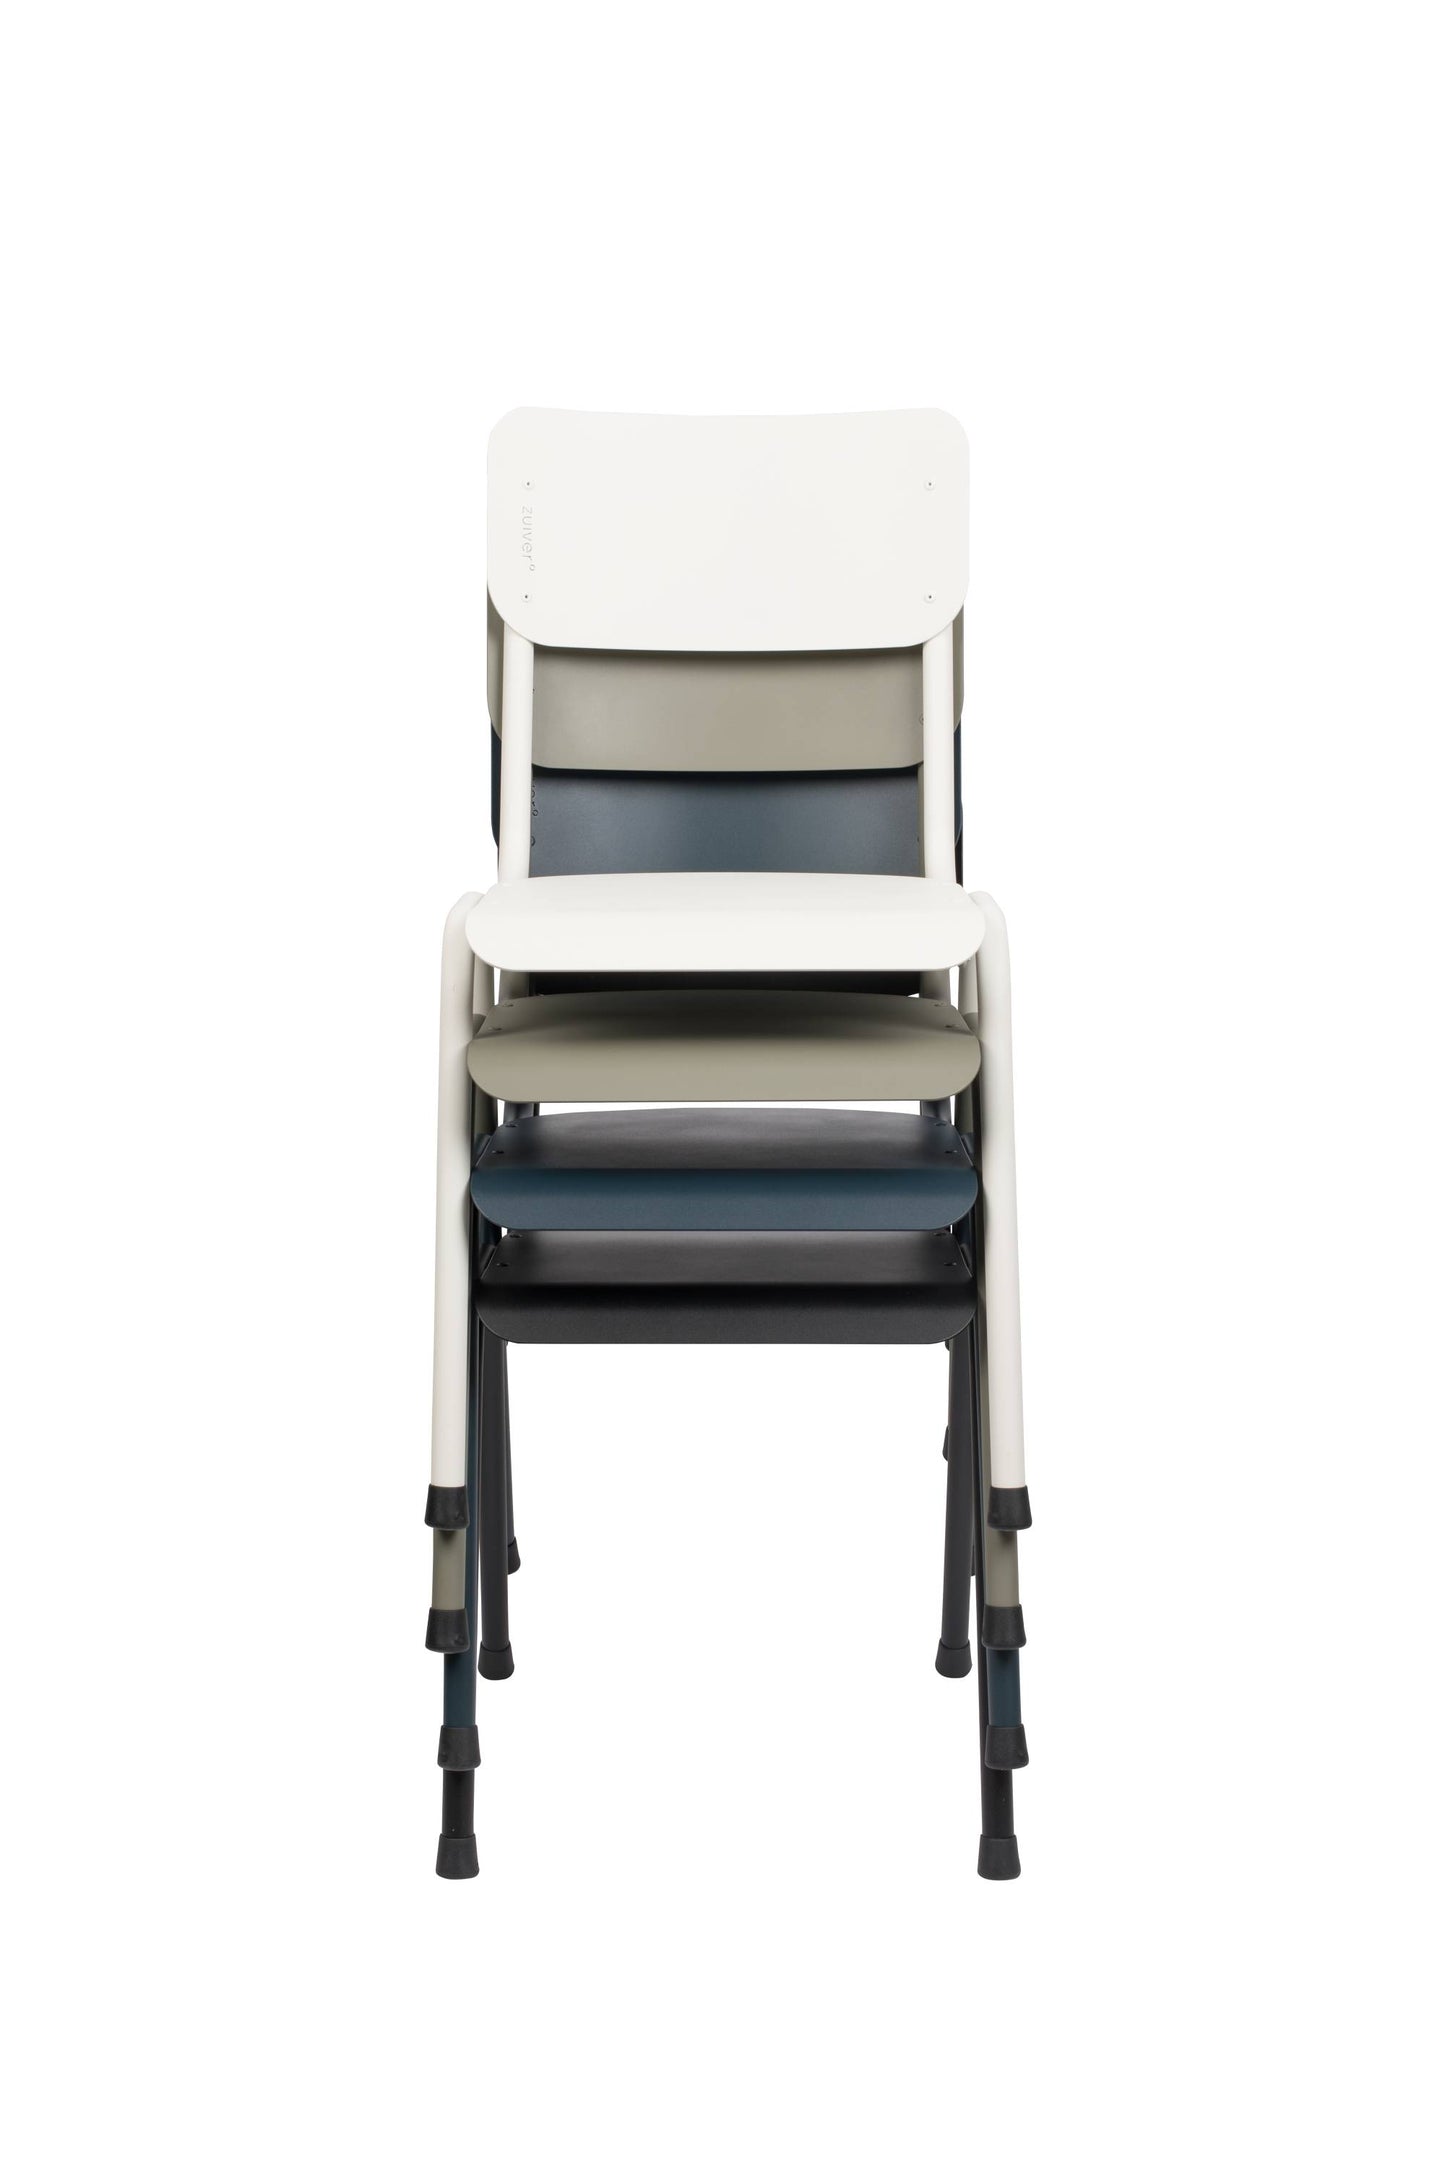 Zuiver | CHAIR BACK TO SCHOOL OUTDOOR WHITE Default Title